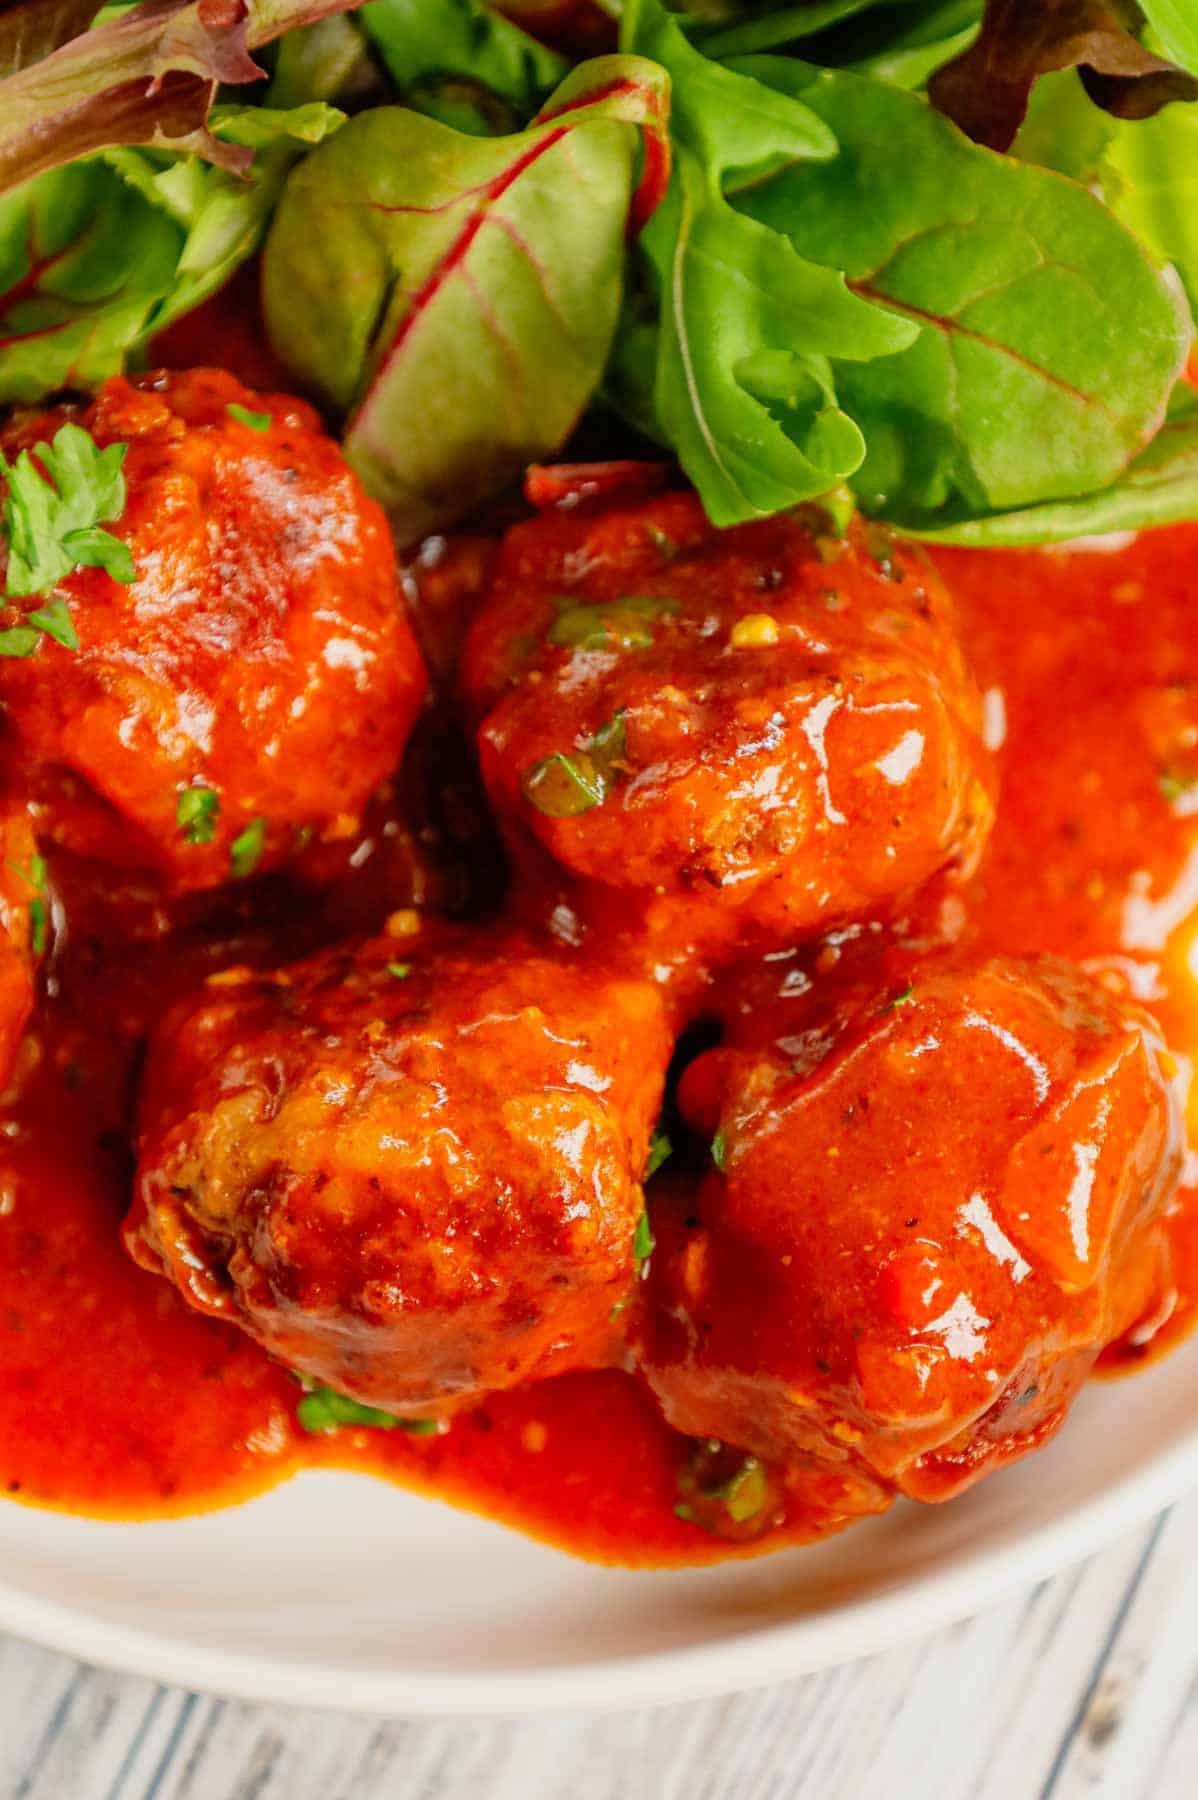 Porcupine Meatballs are delicious meatballs made with ground beef, Minute rice and diced onions all in a flavourful sauce made with condensed tomato soup, Worcestershire sauce and Italian seasoning.